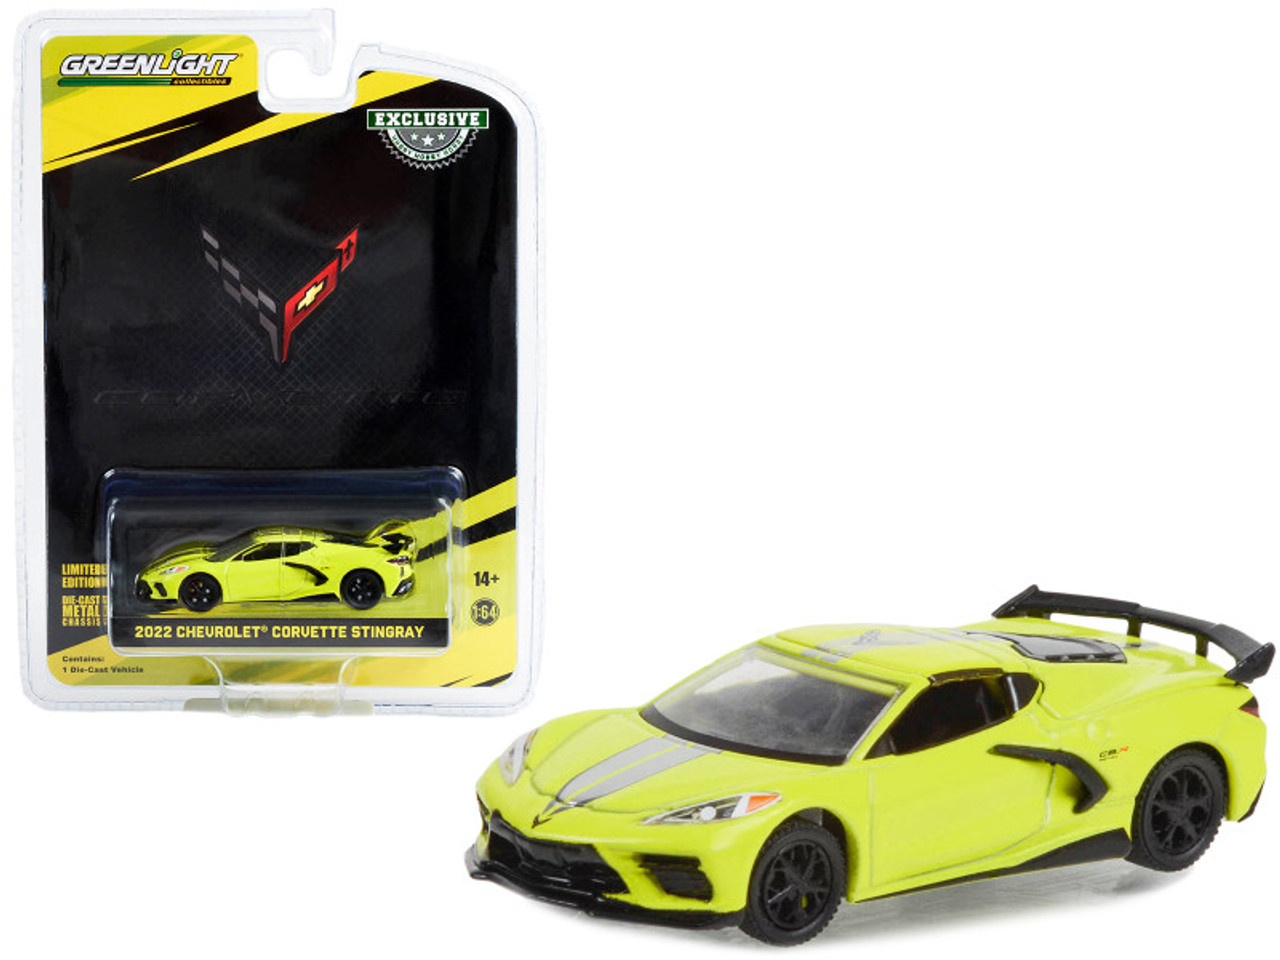 2022 Chevrolet Corvette C8.R Stingray Accelerate Yellow with Silver Stripes "2022 IMSA GTLM Championship Edition" "Hobby Exclusive" Series 1/64 Diecast Model Car by Greenlight